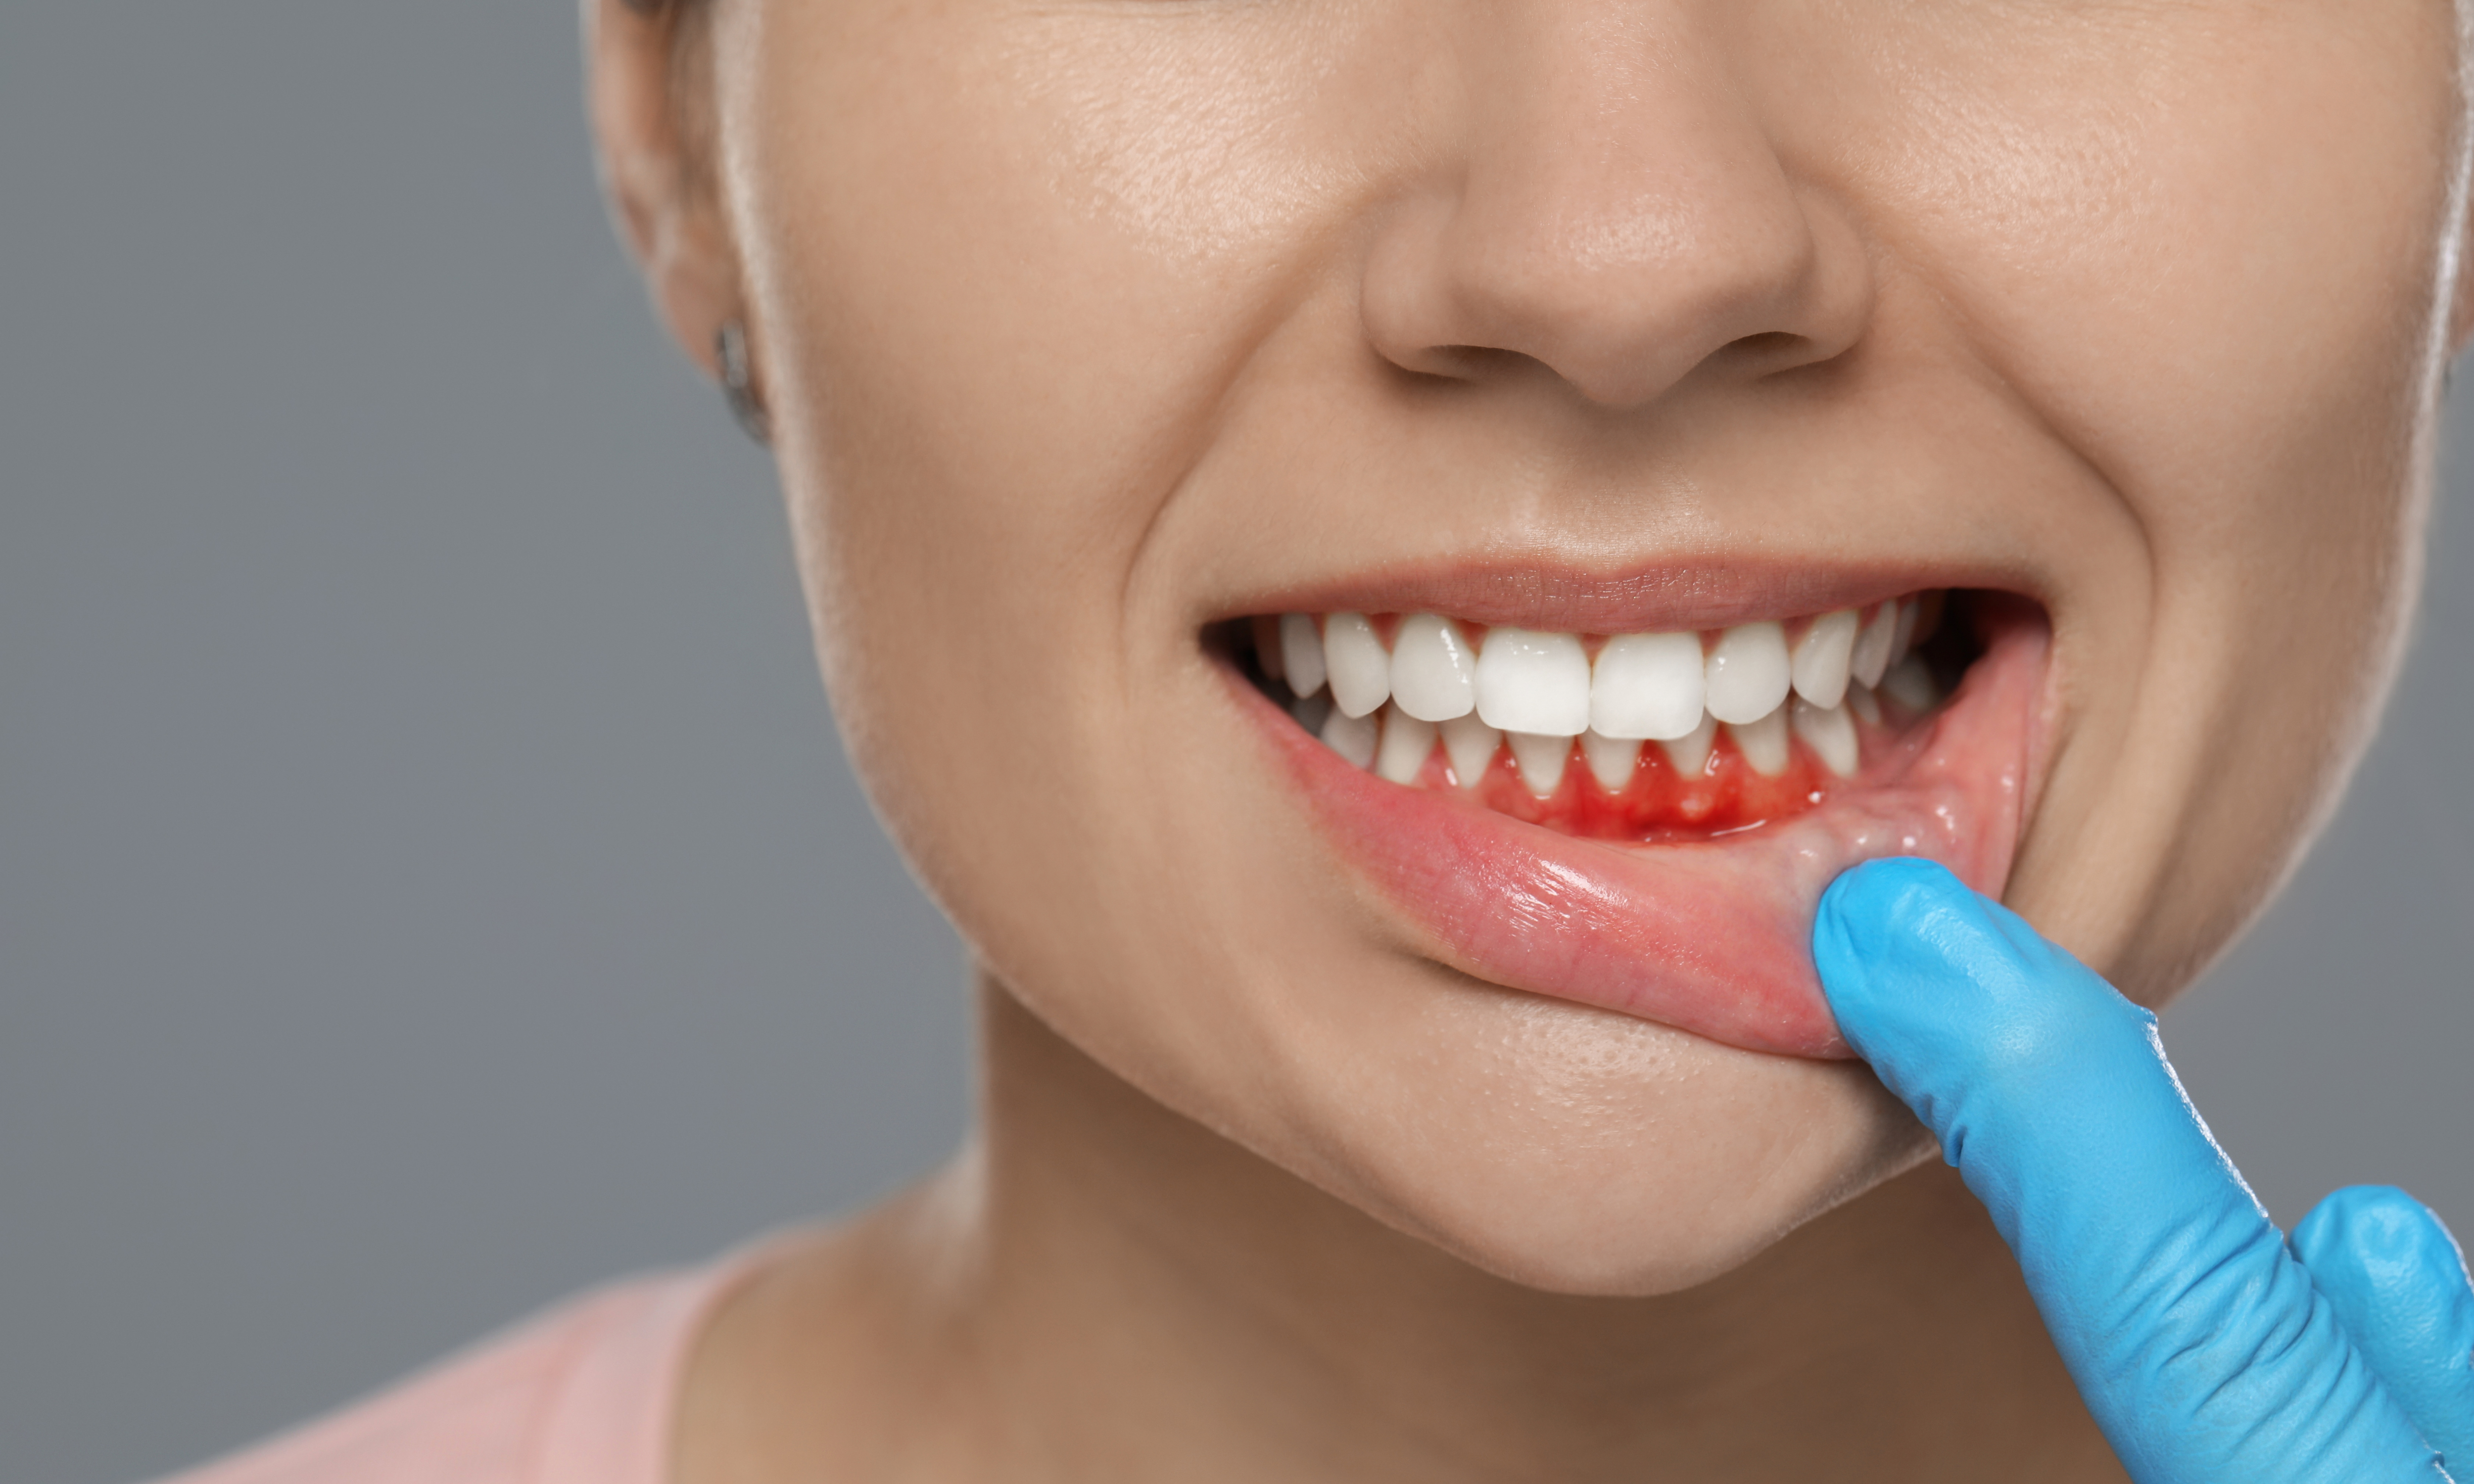 Gum disease treatment and prevention